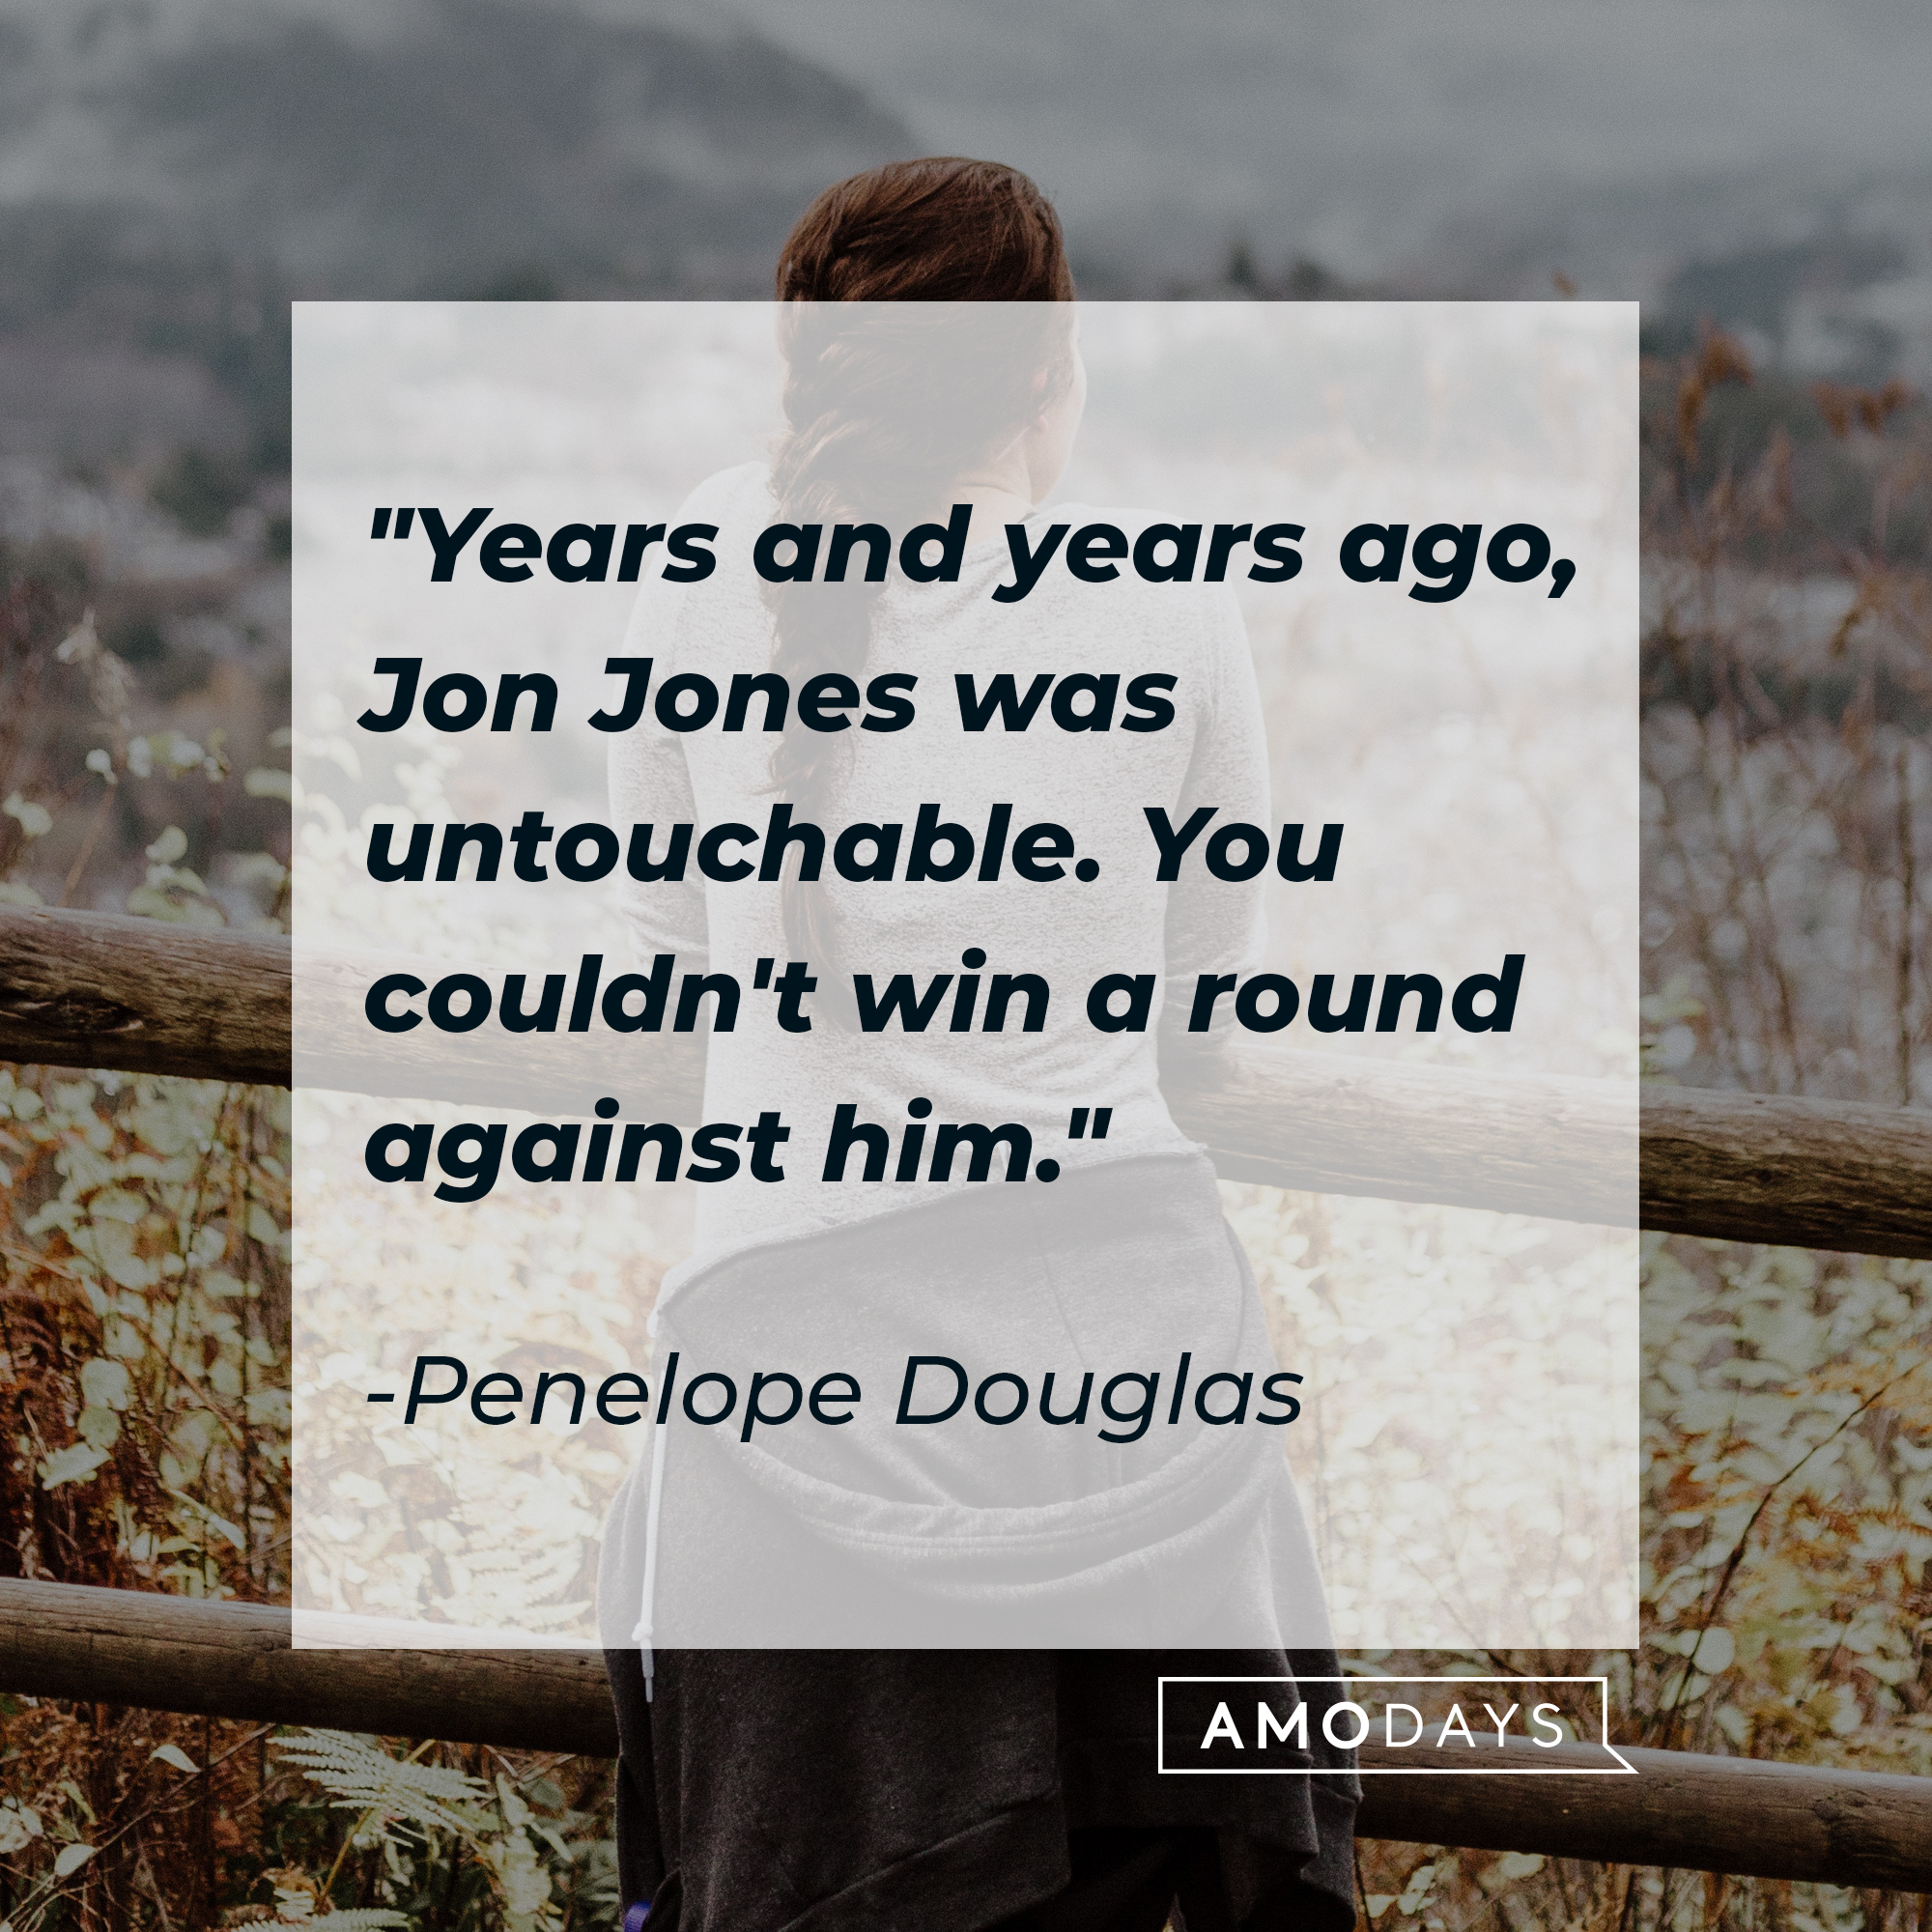 Ryan Bader's quote: "Years and years ago, Jon Jones was untouchable. You couldn't win a round against him." | Source: Unsplash